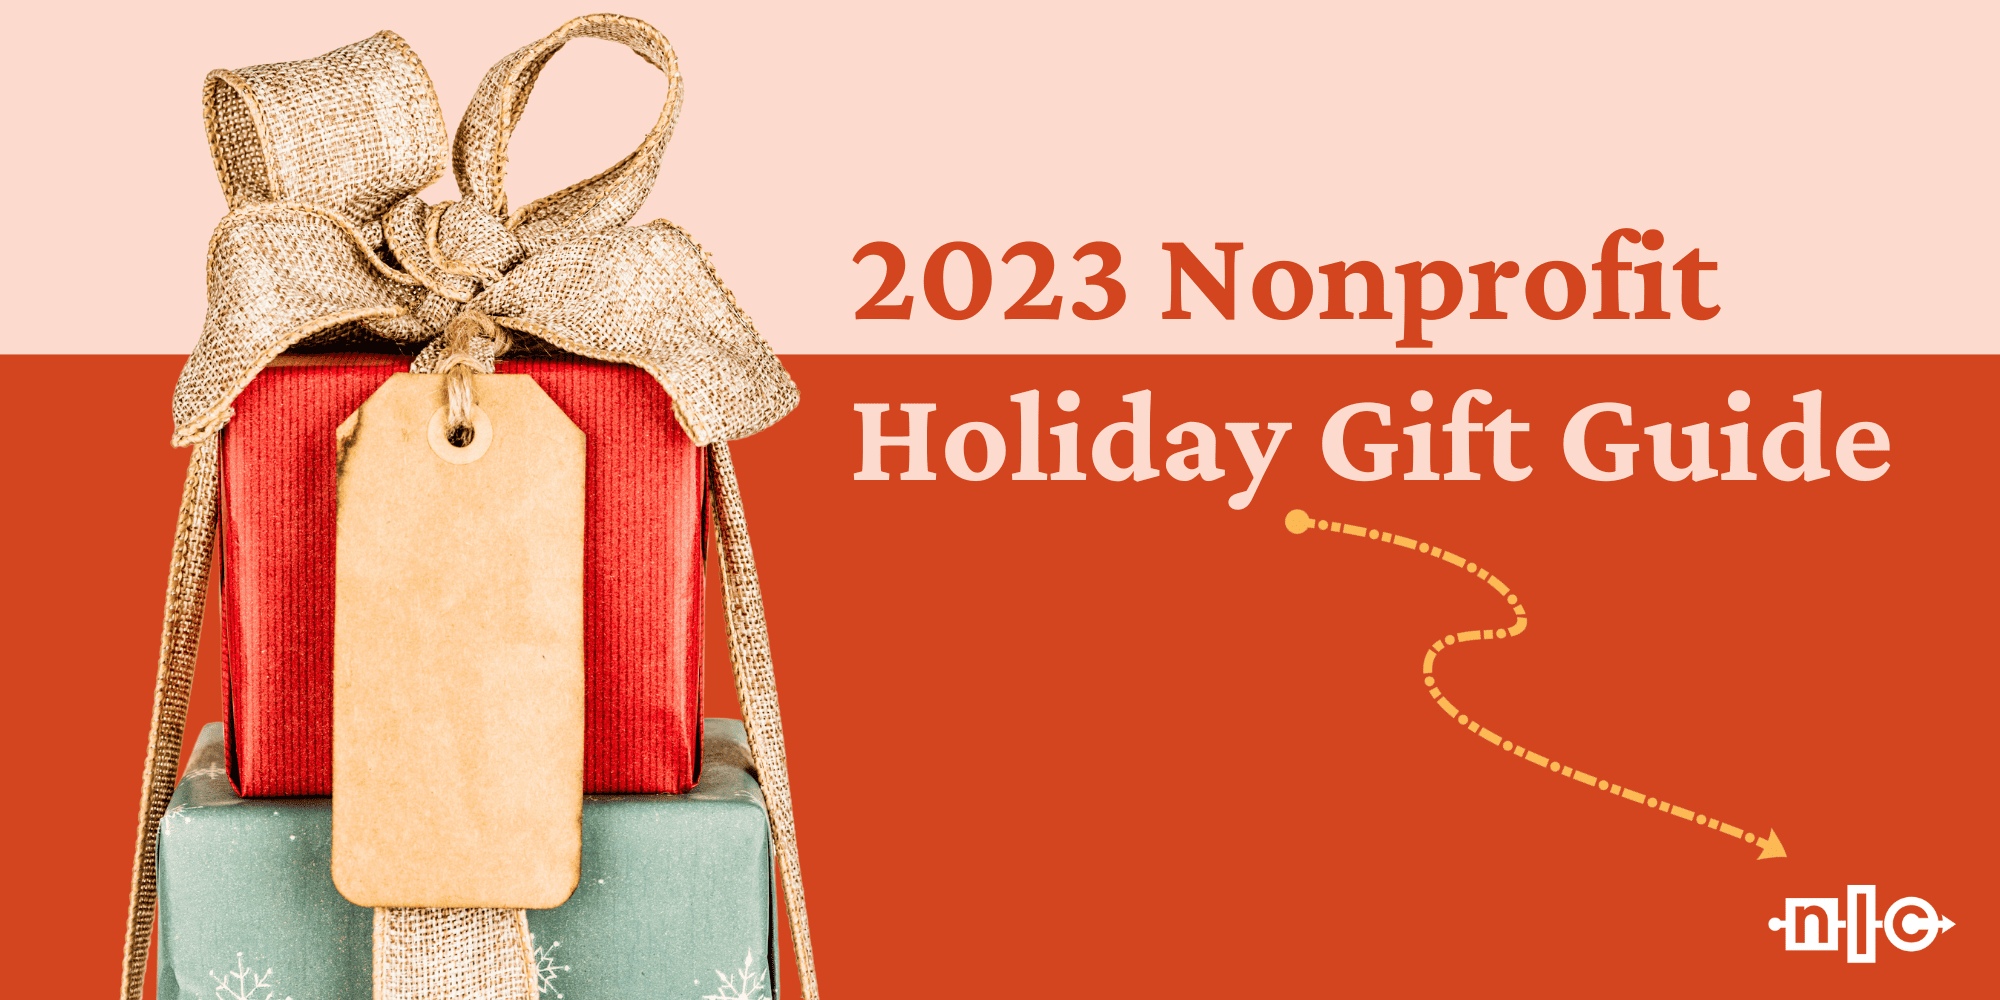 https://nlctb.org/wp-content/uploads/2023-Holiday-Gift-Guide.png